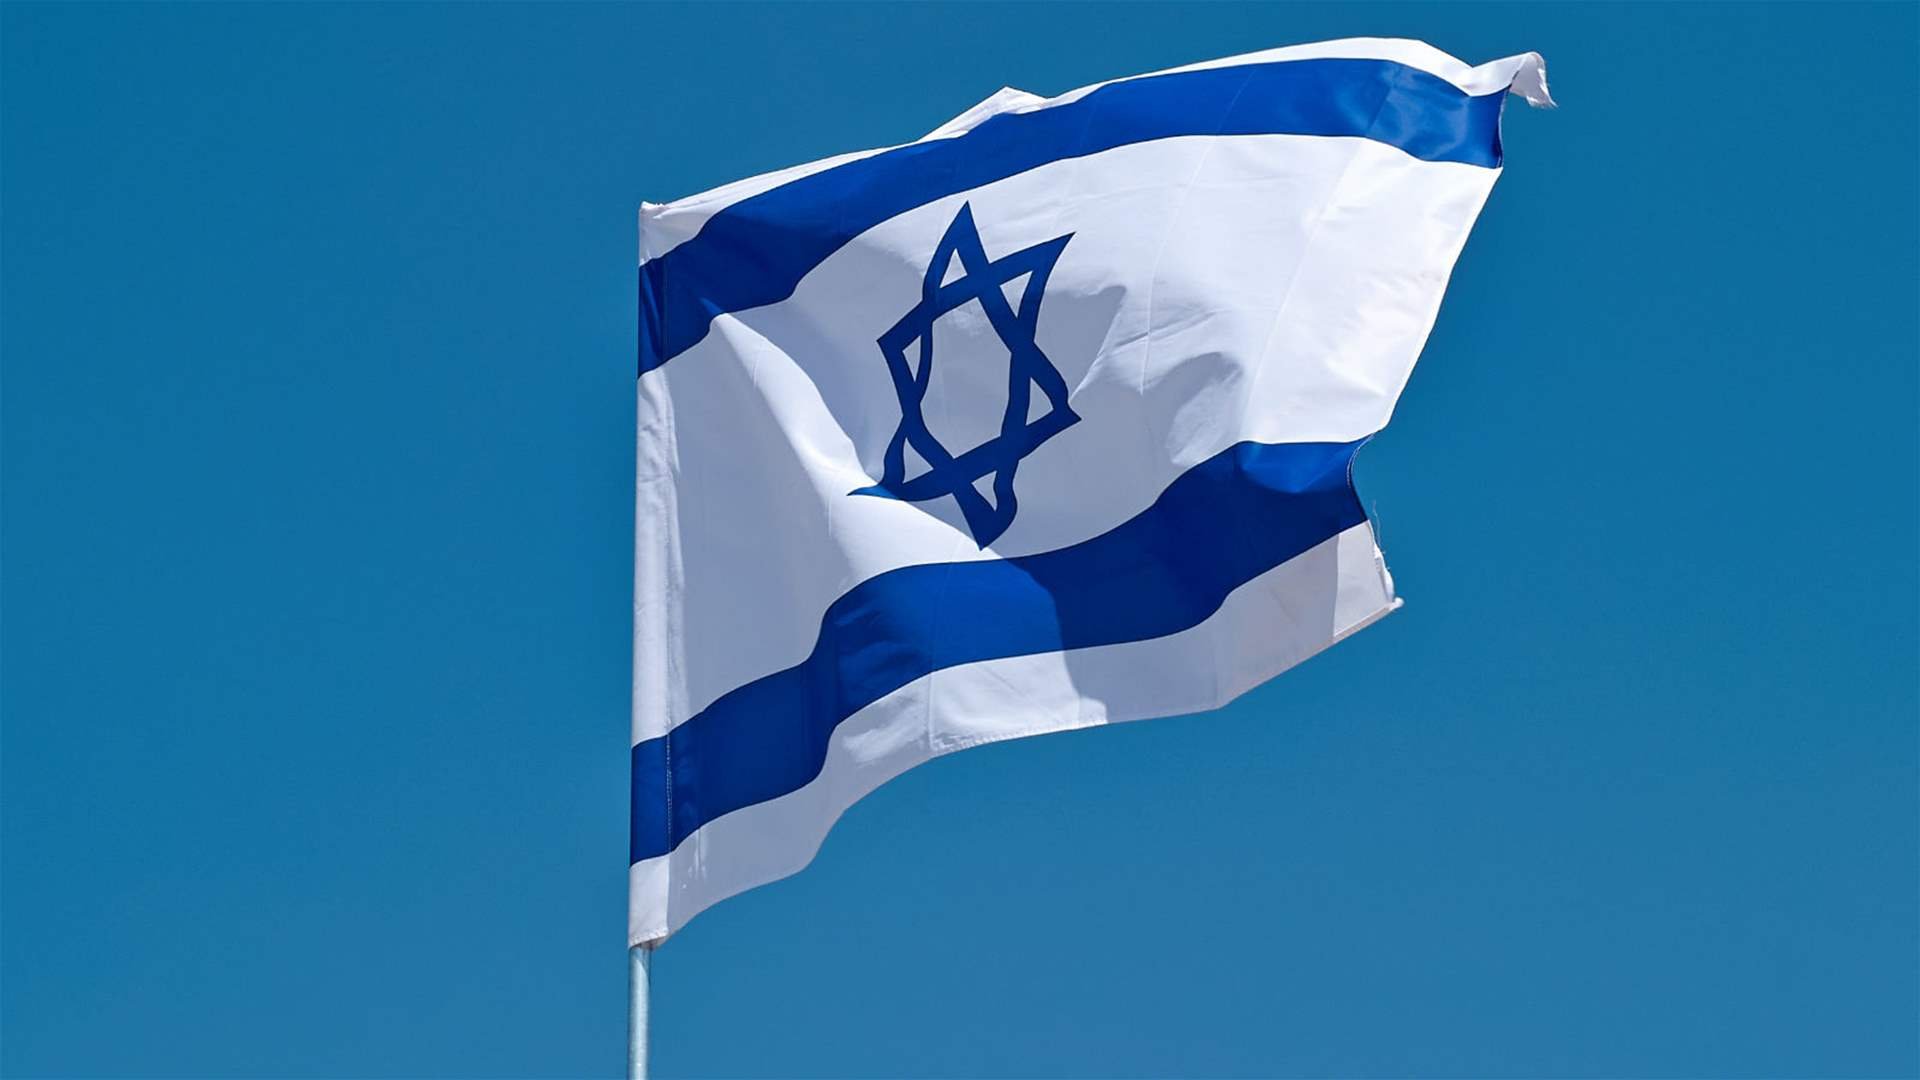 Israel advises its citizens abroad to exercise extreme caution